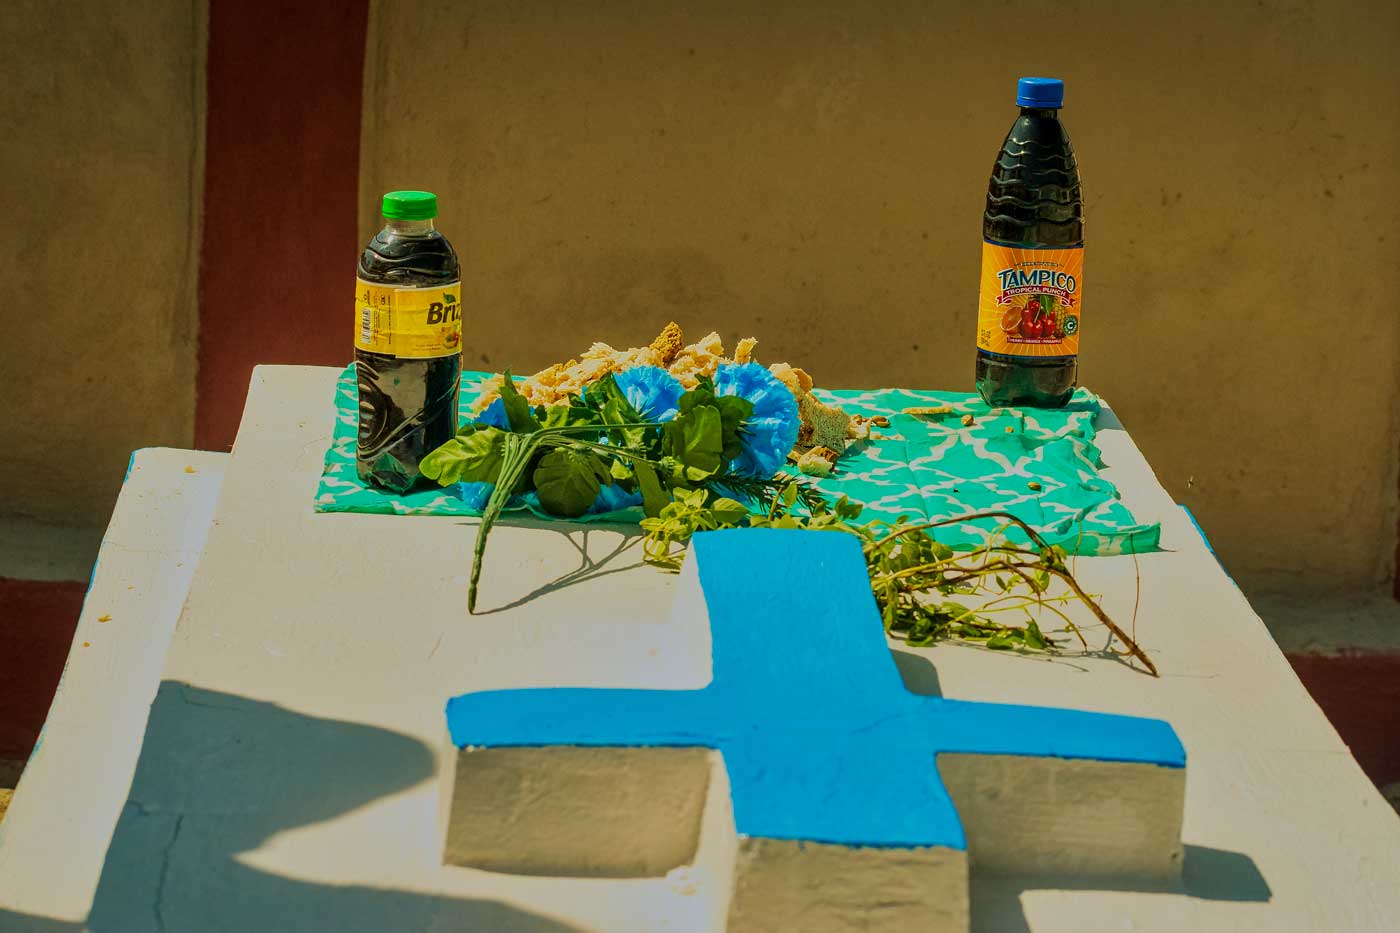 gravestone at haitian cemetery with two soda bottles and flowers